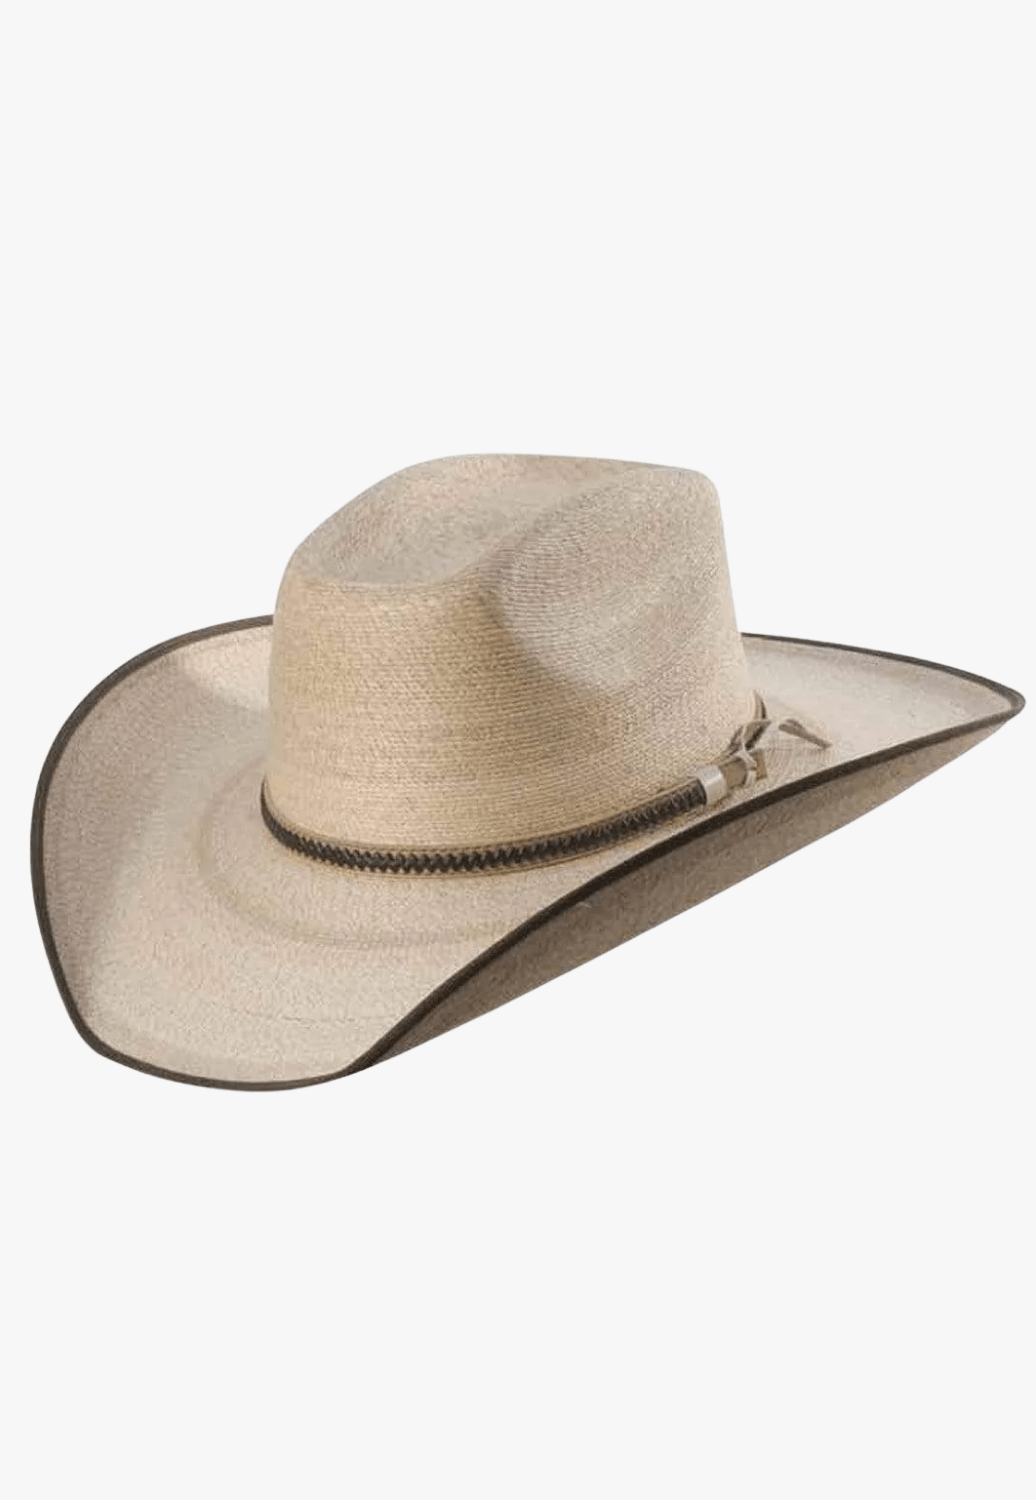 Sunbody HATS - Straw Sunbody Mexican Fine Palm Hat